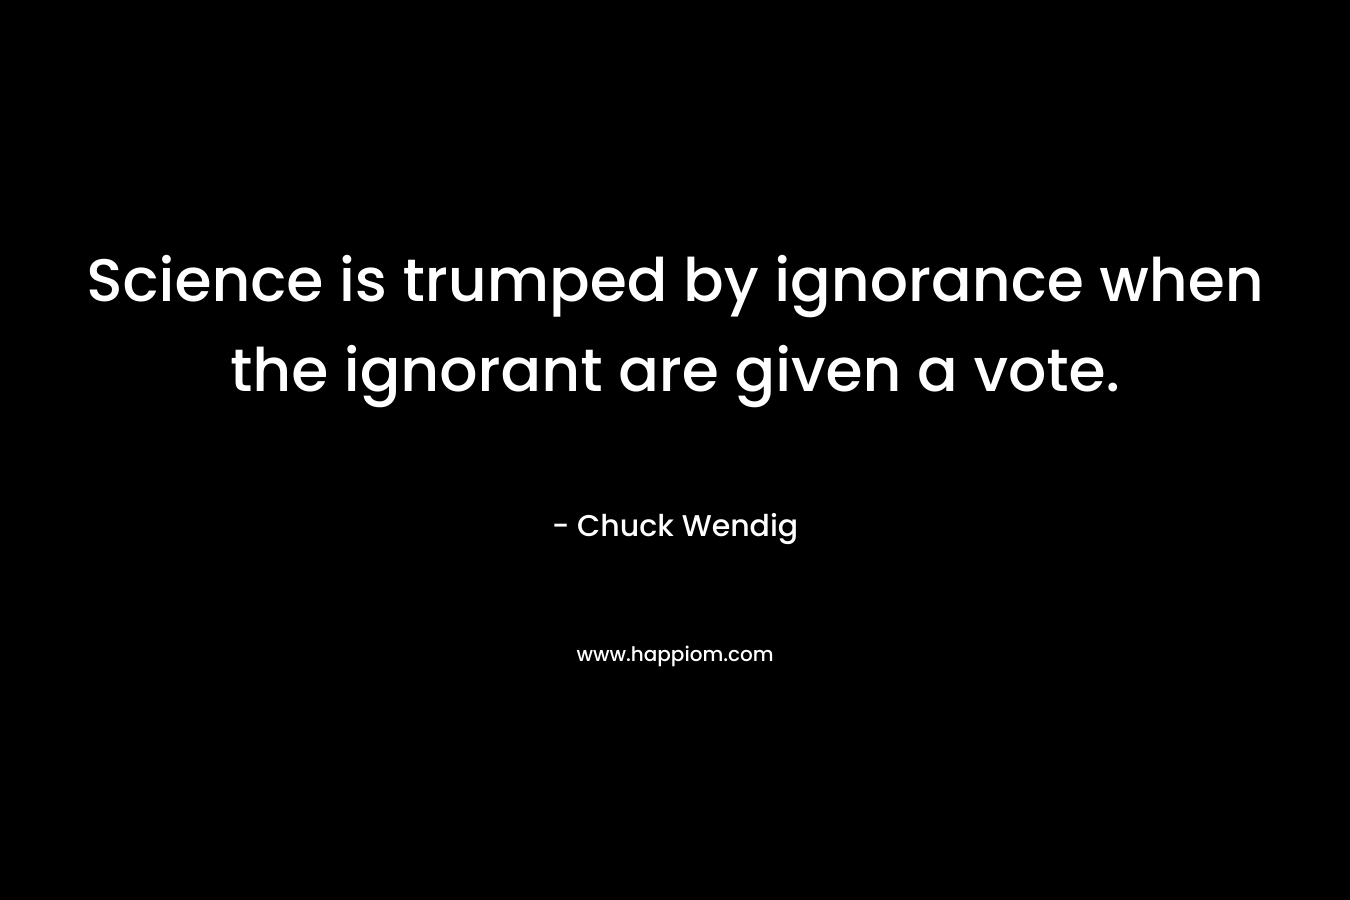 Science is trumped by ignorance when the ignorant are given a vote.